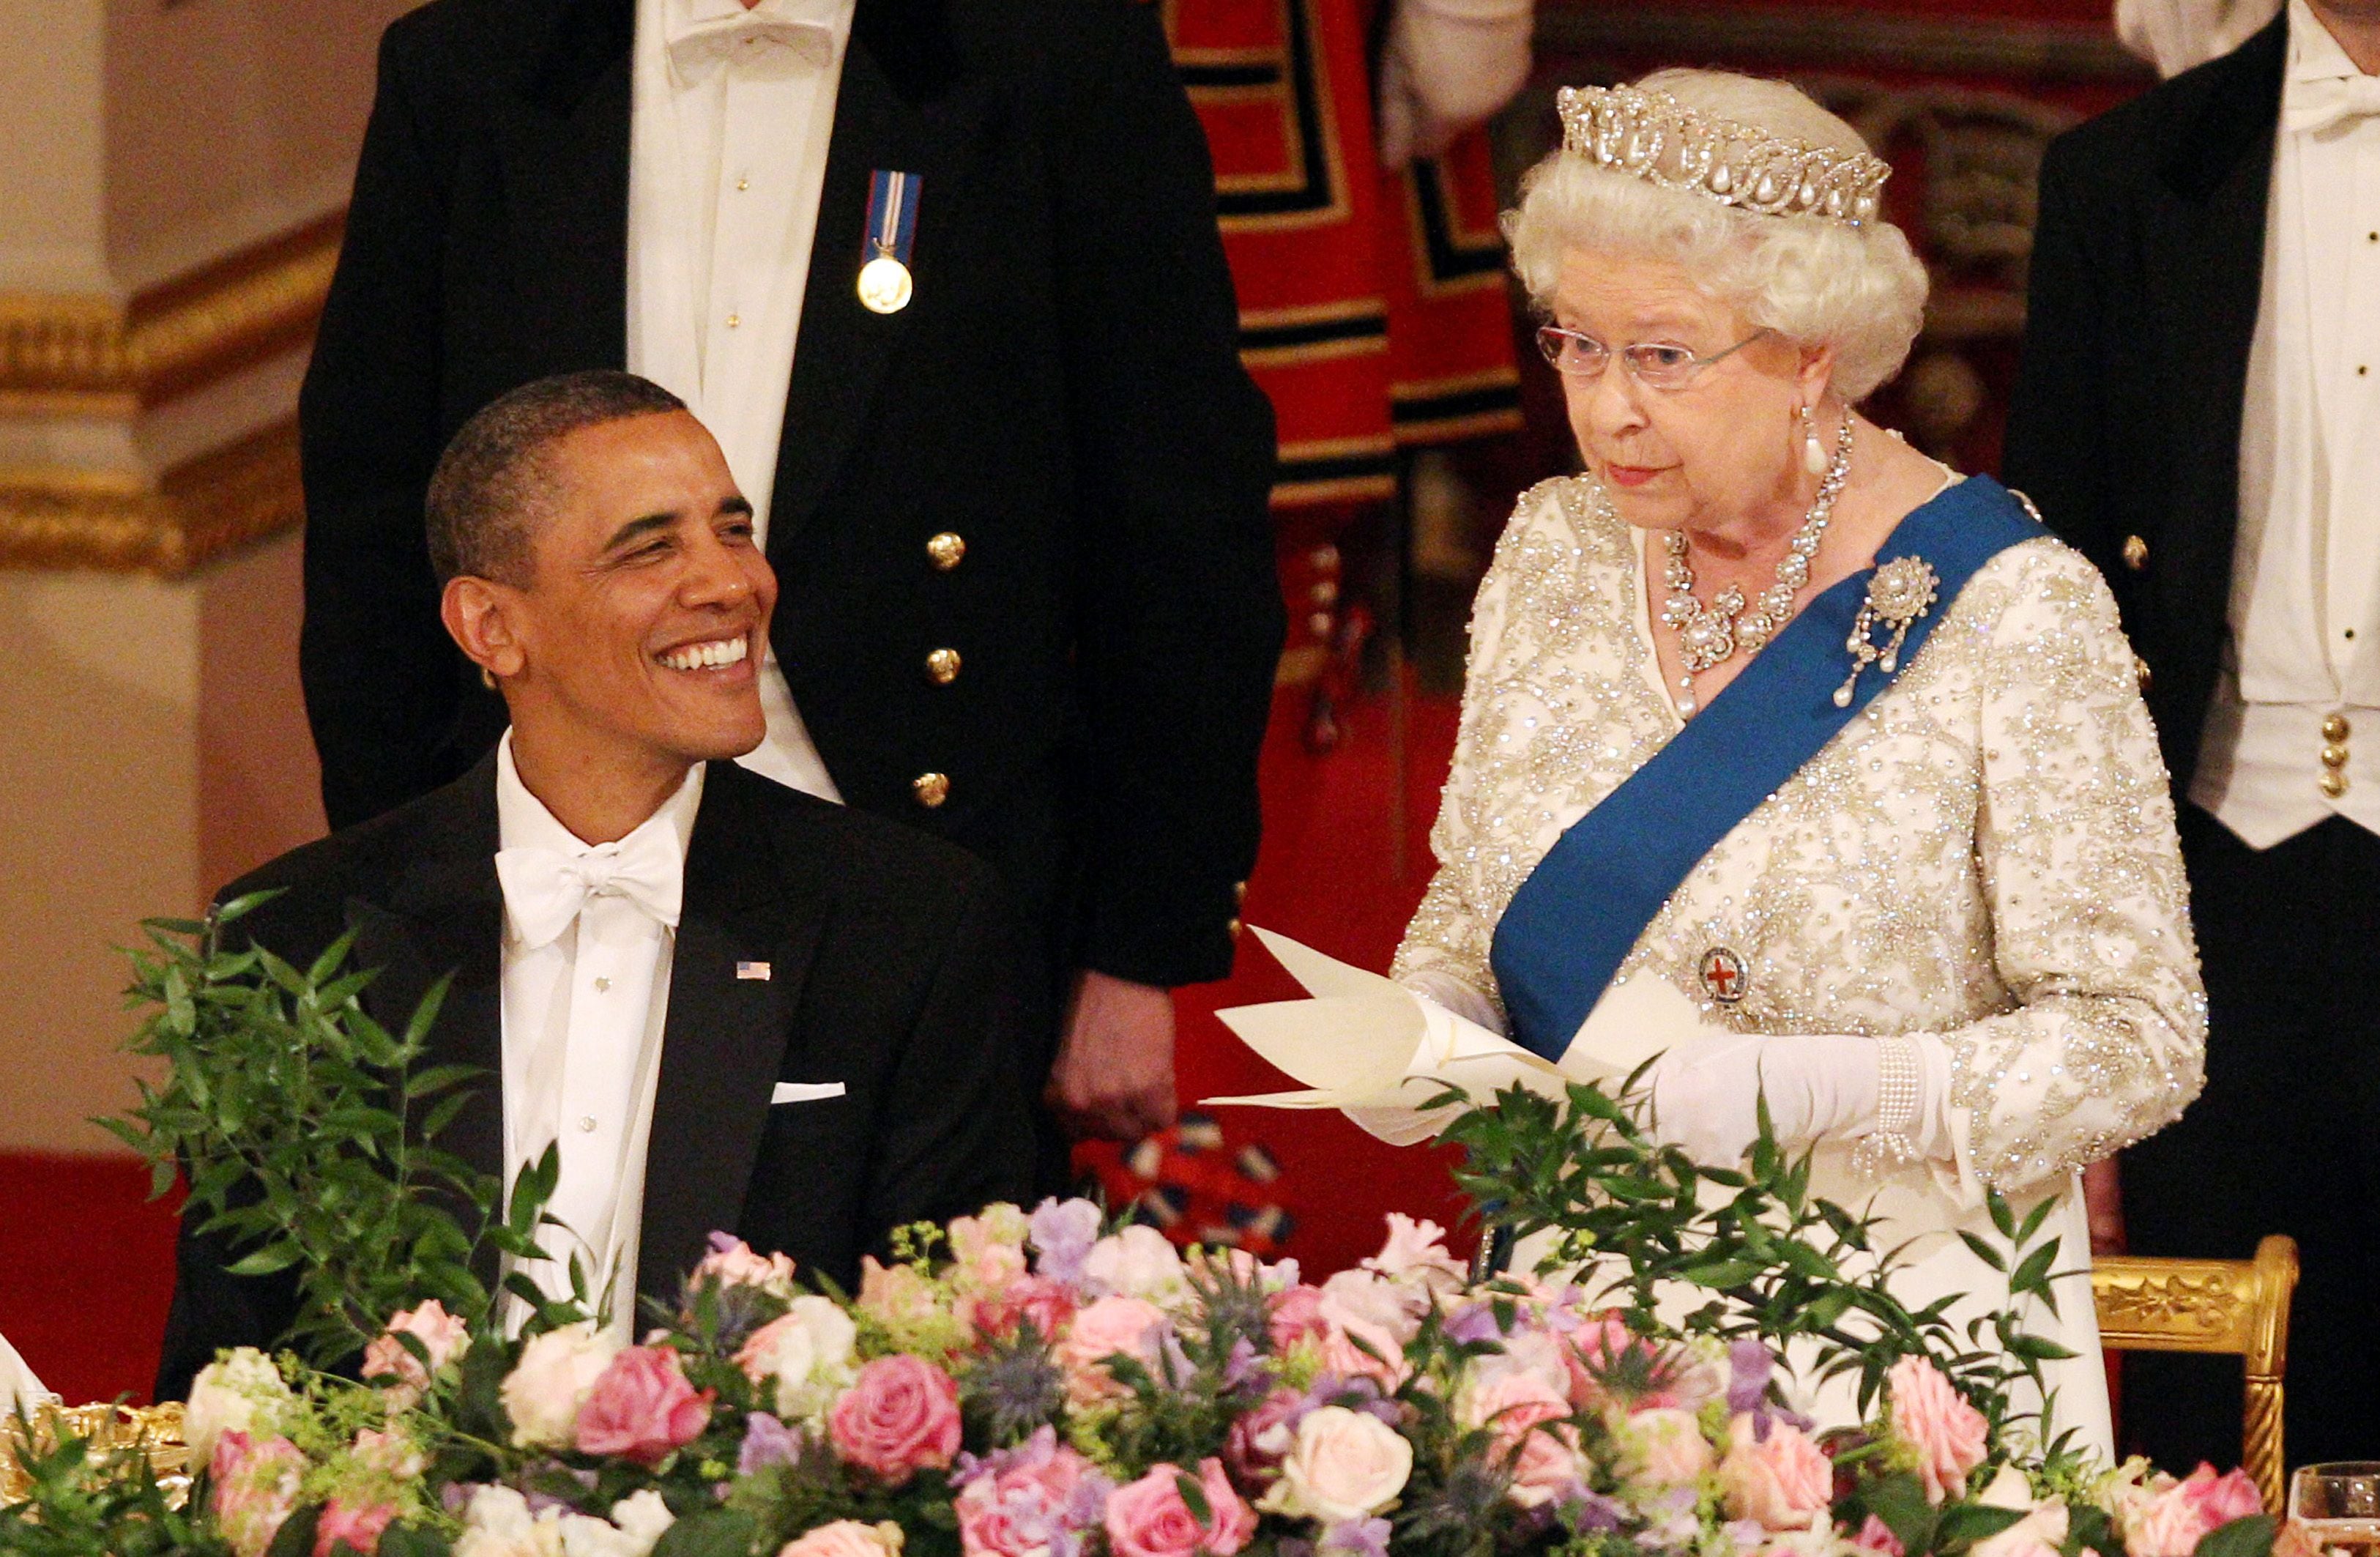 Queen Elizabeth II and US President Barack Obama at a 2011 Buckingham Palace state banquet